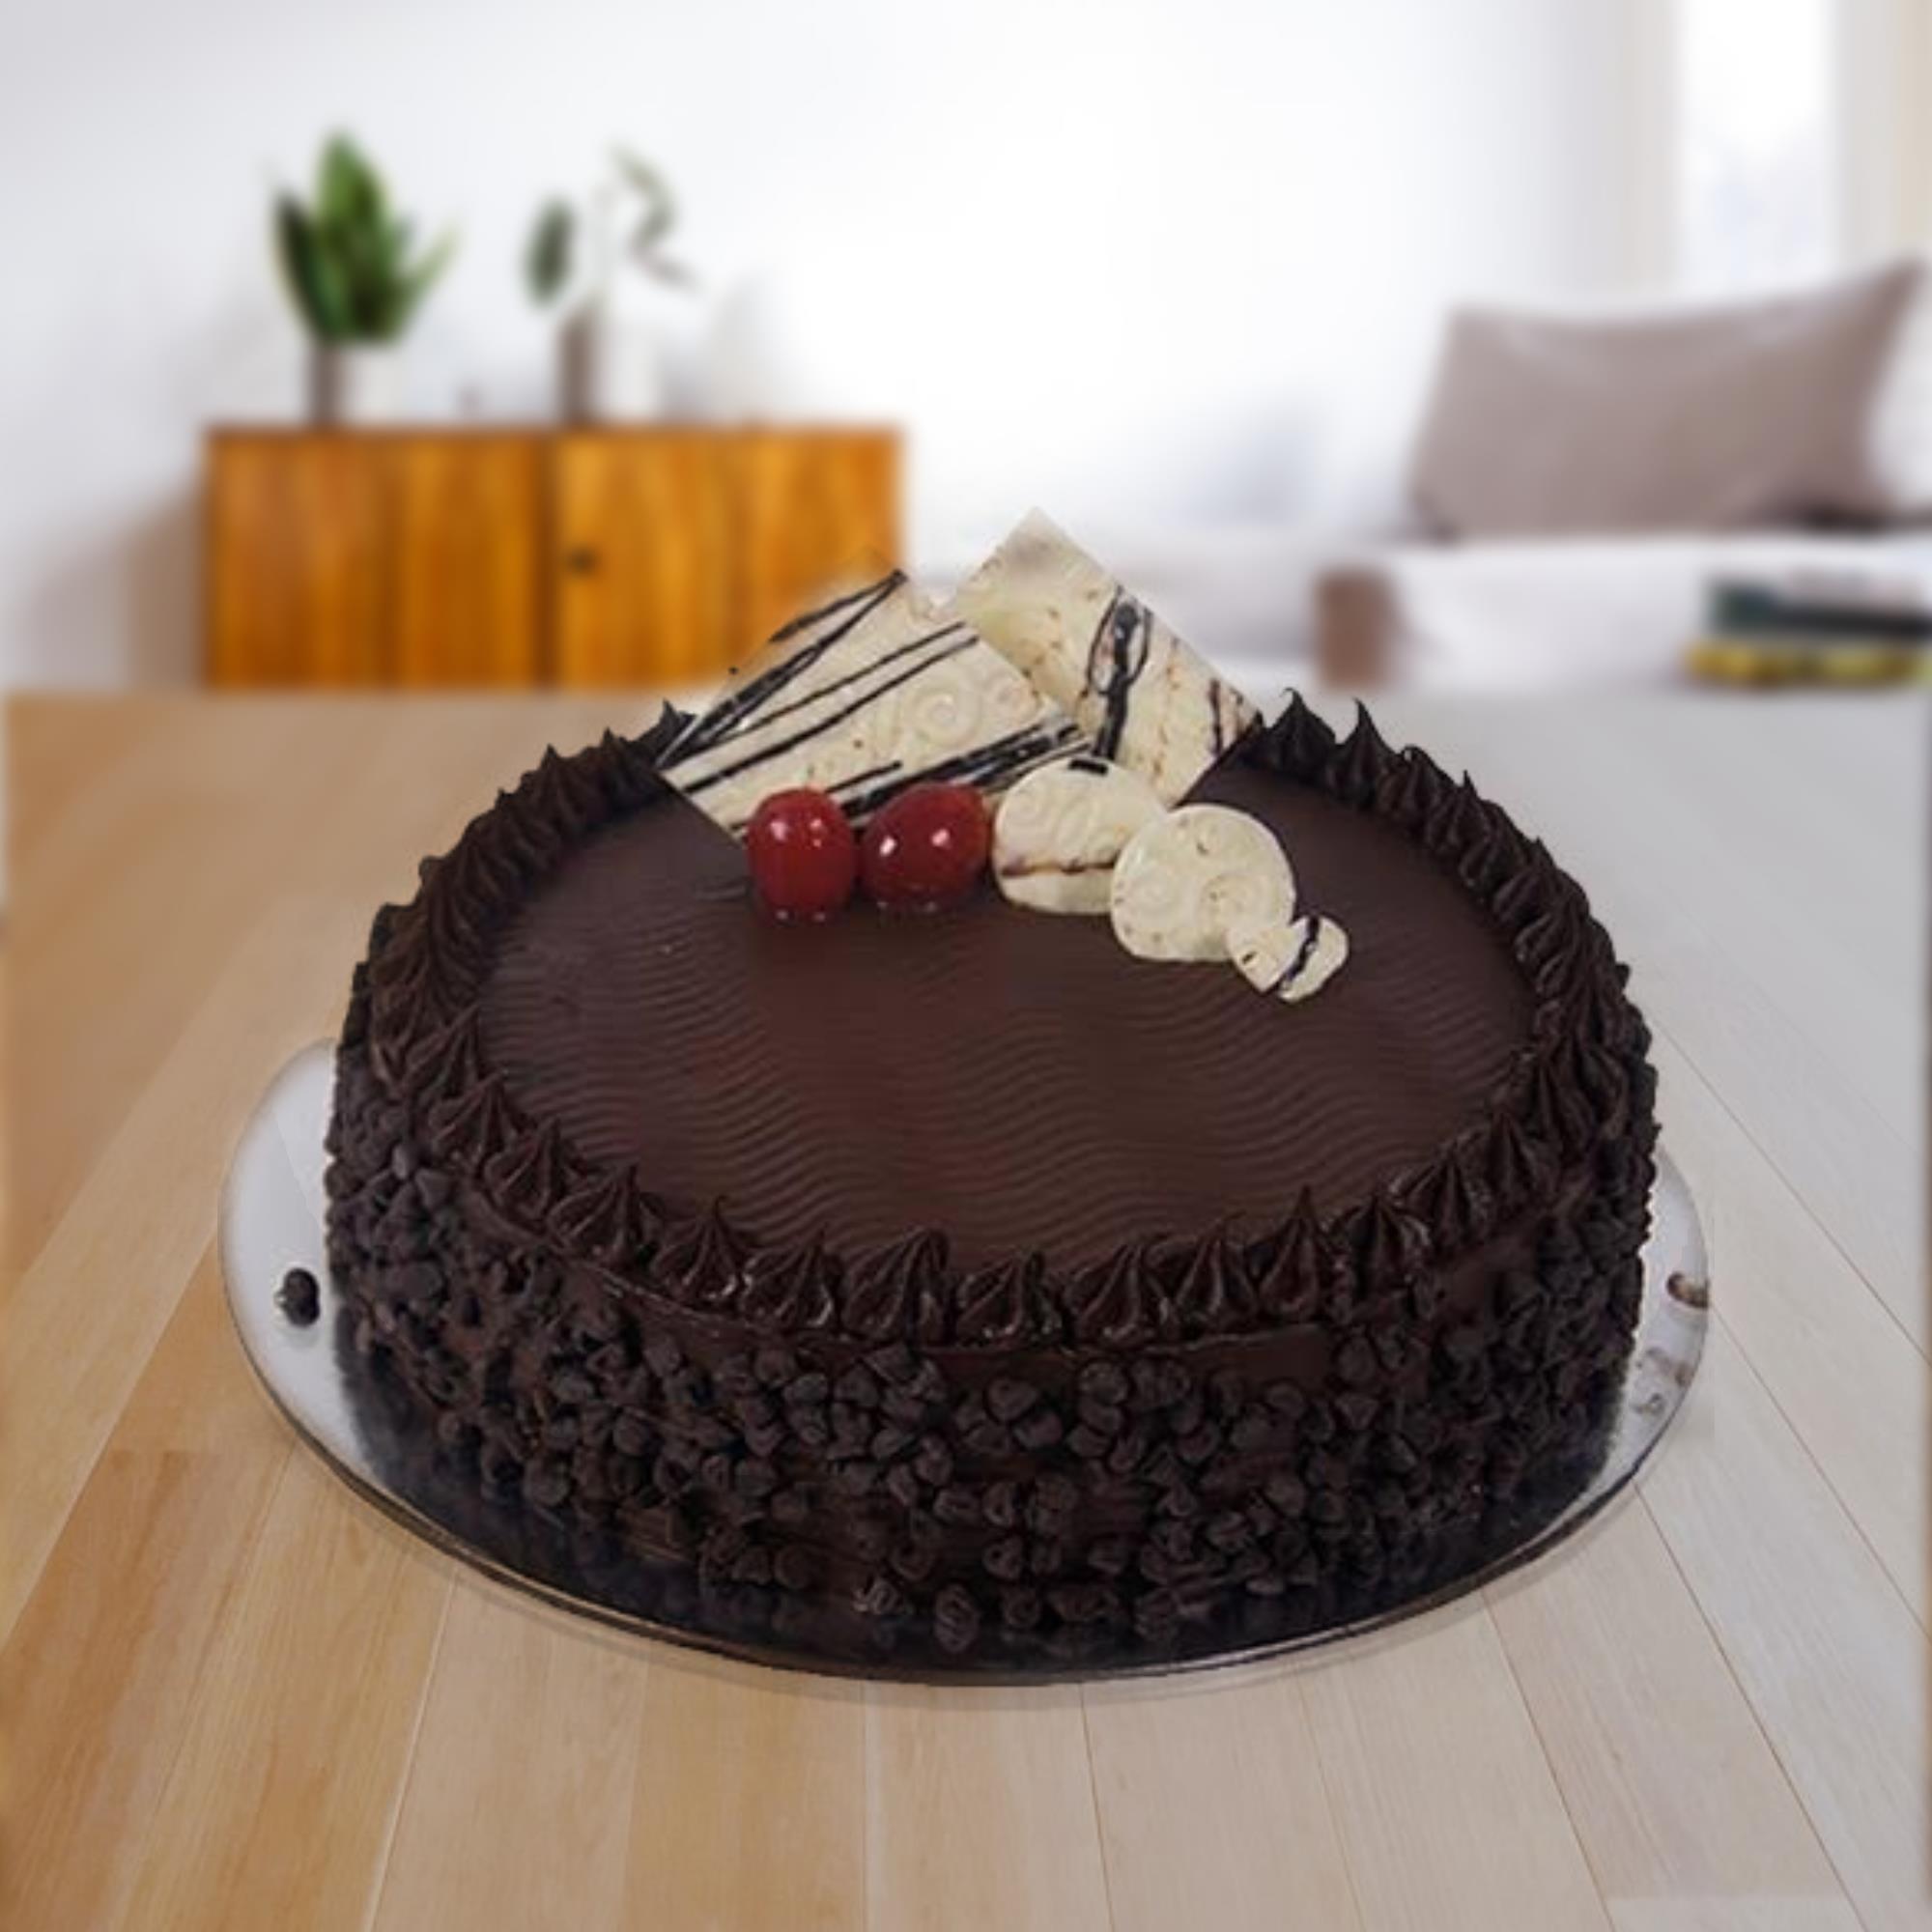 Order Choco Chips Cake online @ ₹149.00 - Your Cake Shop